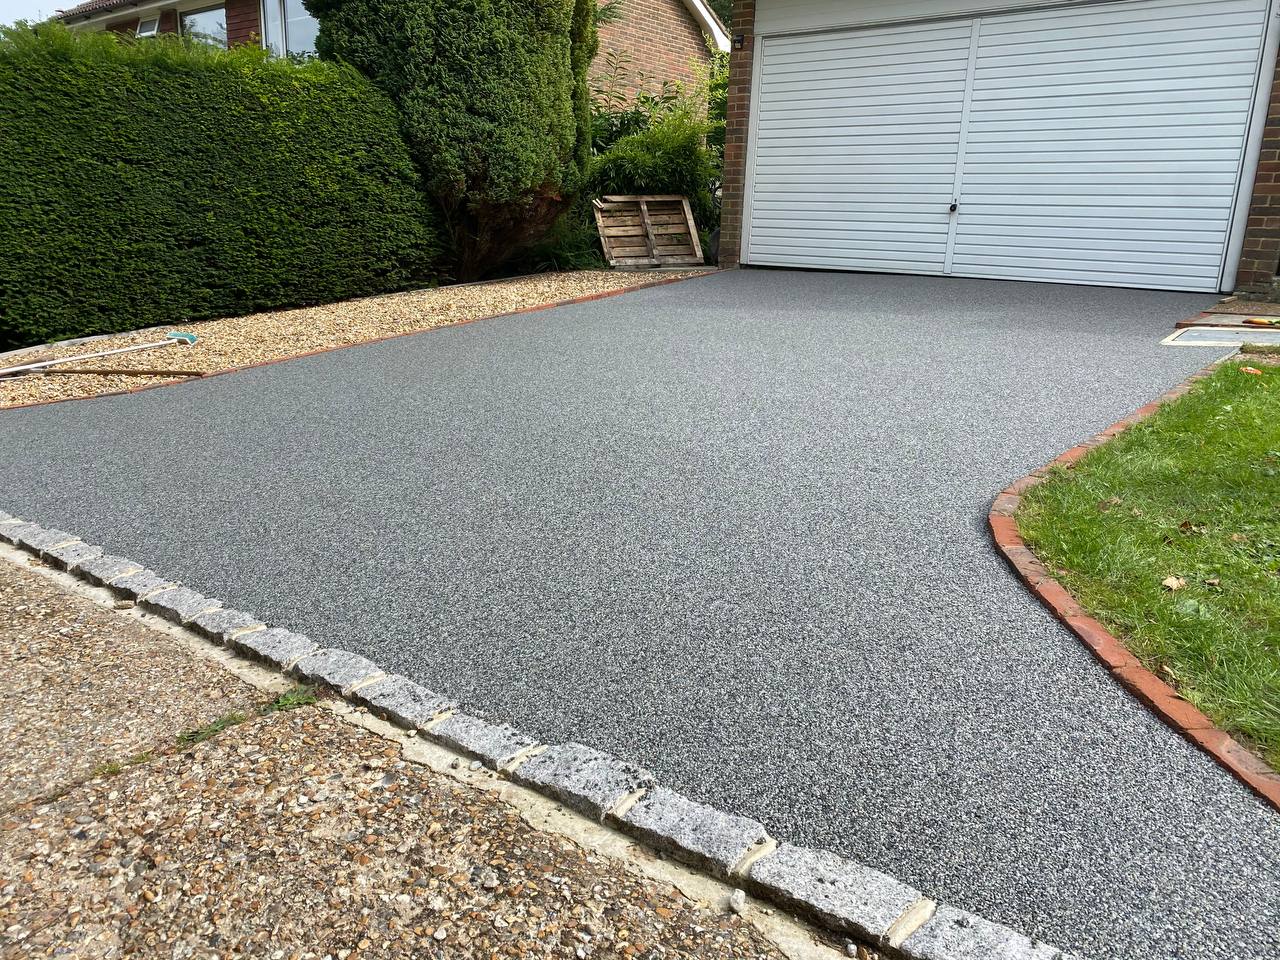 This is a photo of a resin driveway installed in Wigan by Wigan Resin Driveways